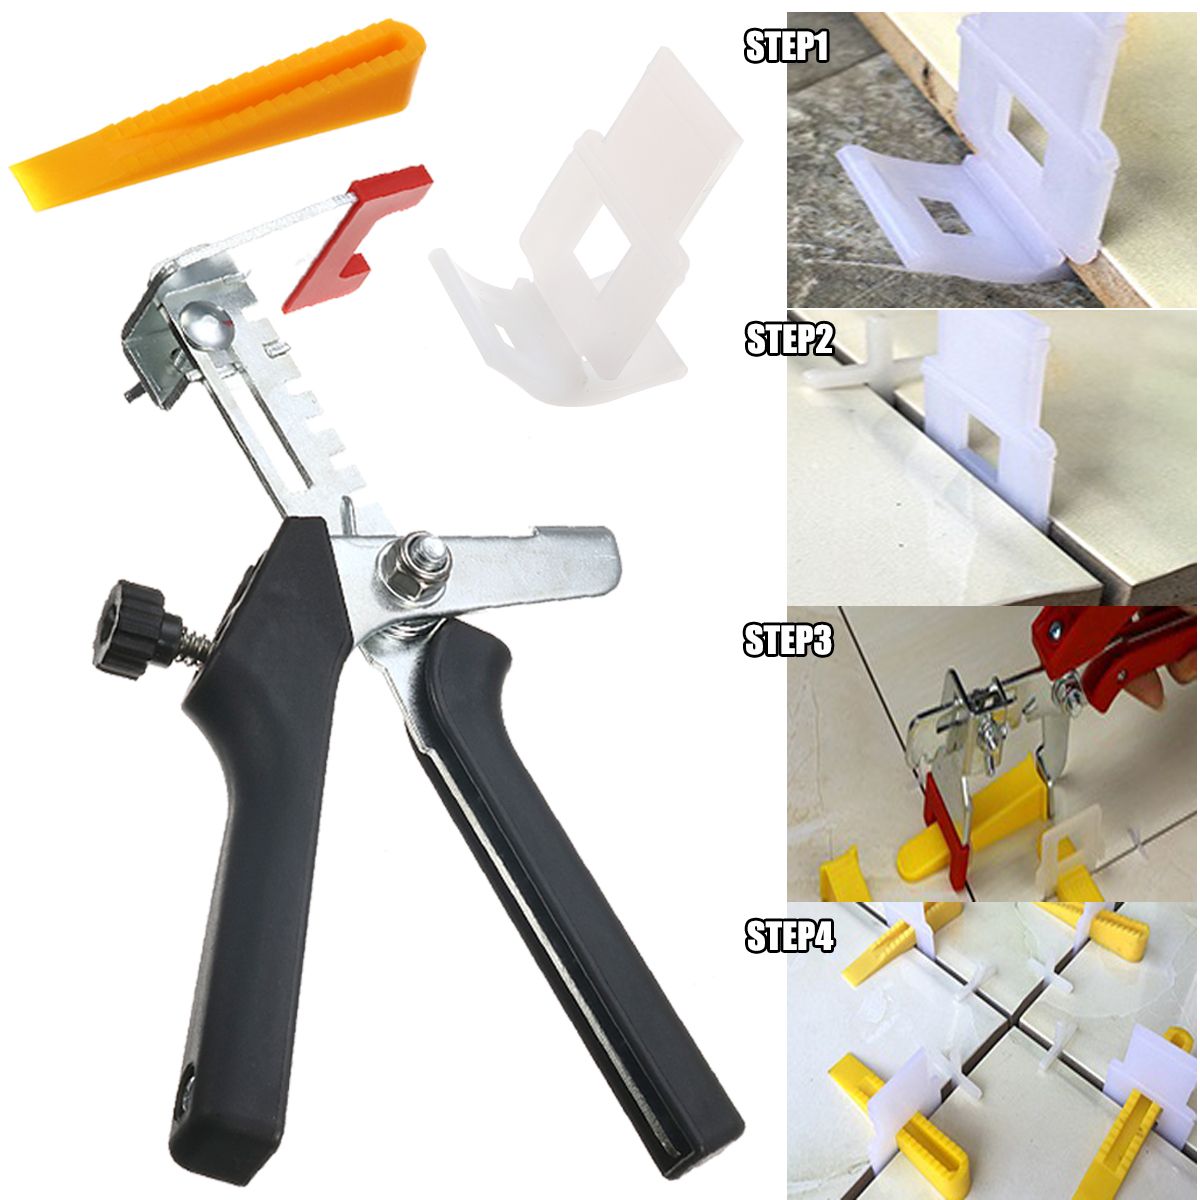 100pcs-Tile-Leveling-System-Wedges-and-Clips-Plier-Spacer-Flooring-Plastic-Tiling-Tools-1148268